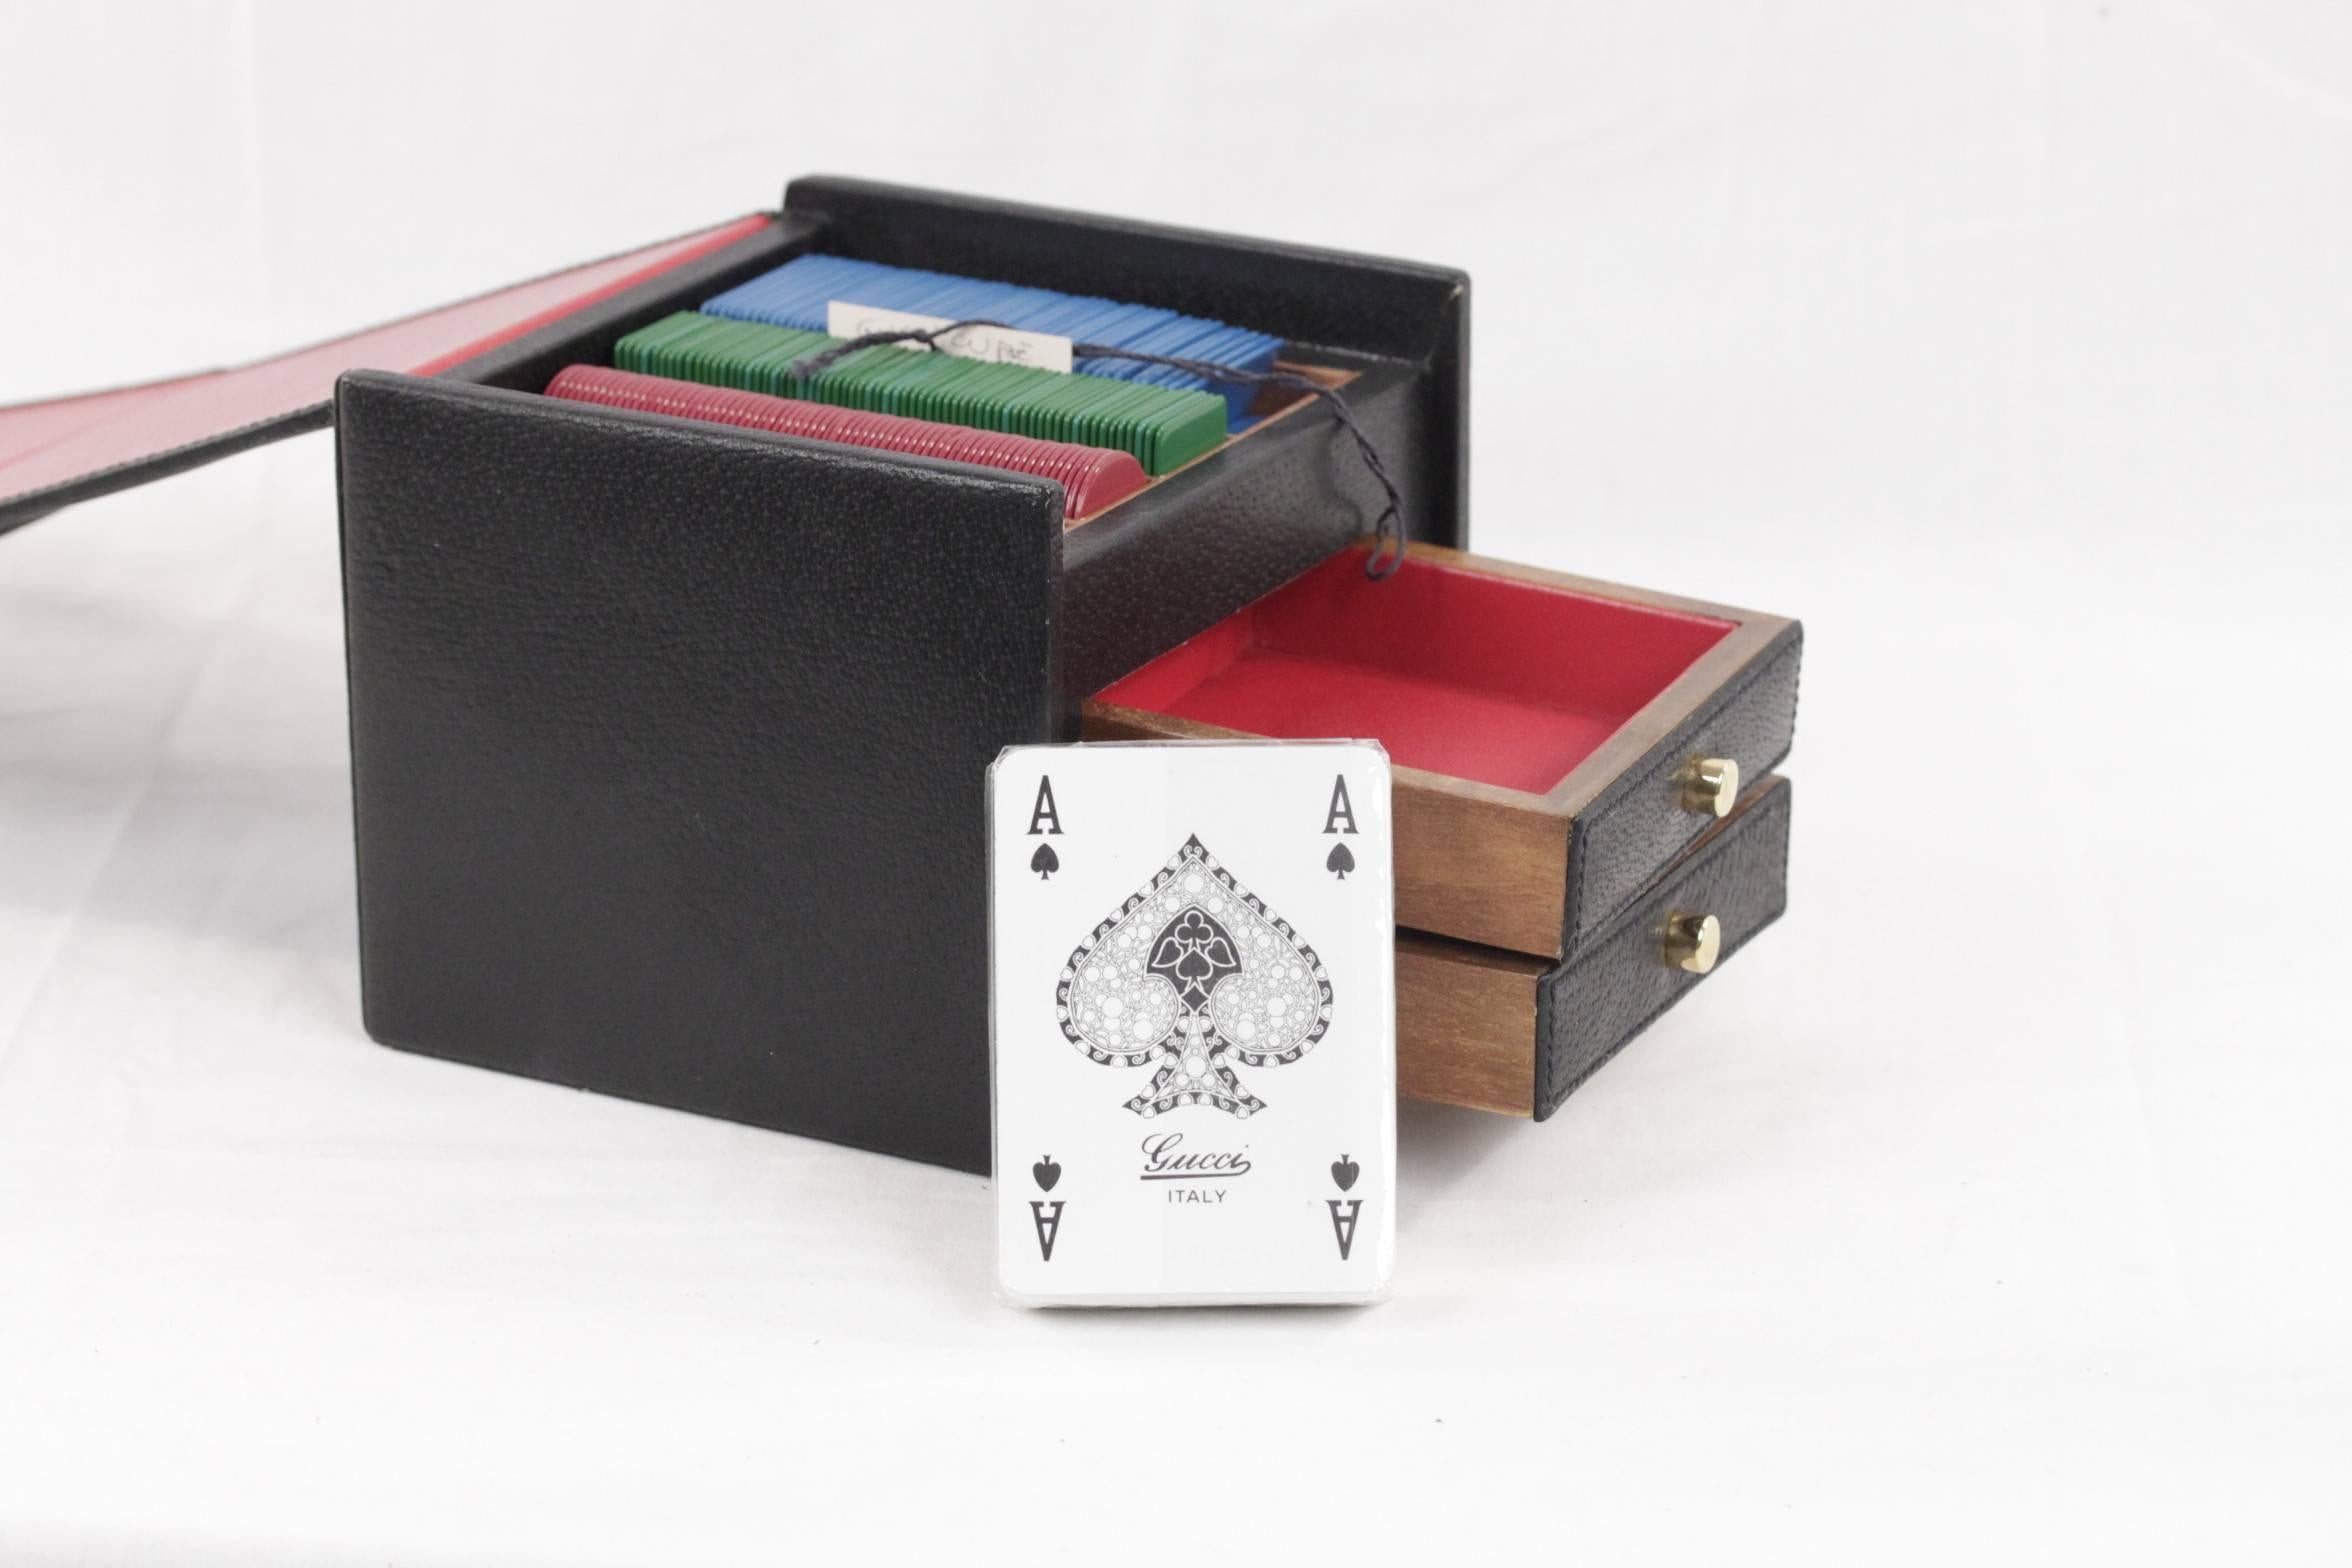 - Unique GUCCI Poker set contained in an elegant black cube box with metal GG - GUCCI logo and Green/Red/Green striped detailing on the front

- The box is crafted ingenuine leather it has 2 small drawers inside

- Red leather lining

- The